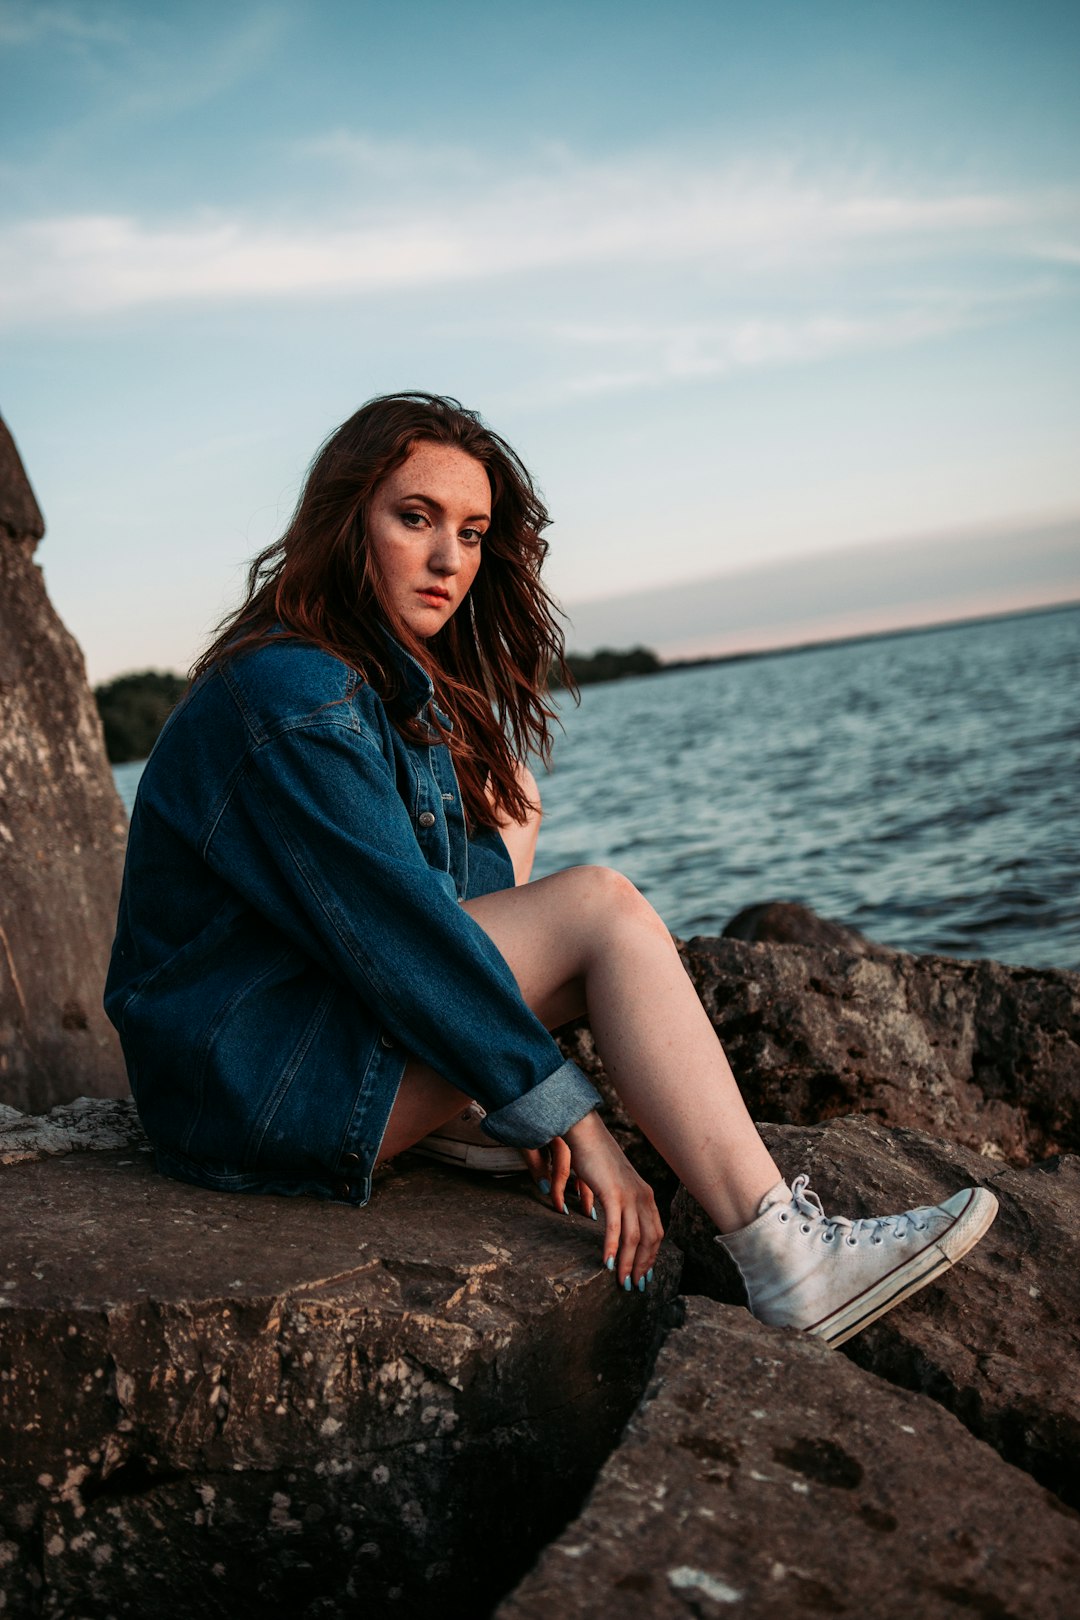 woman in blue denim jacket sitting on brown rock near body of water during daytime